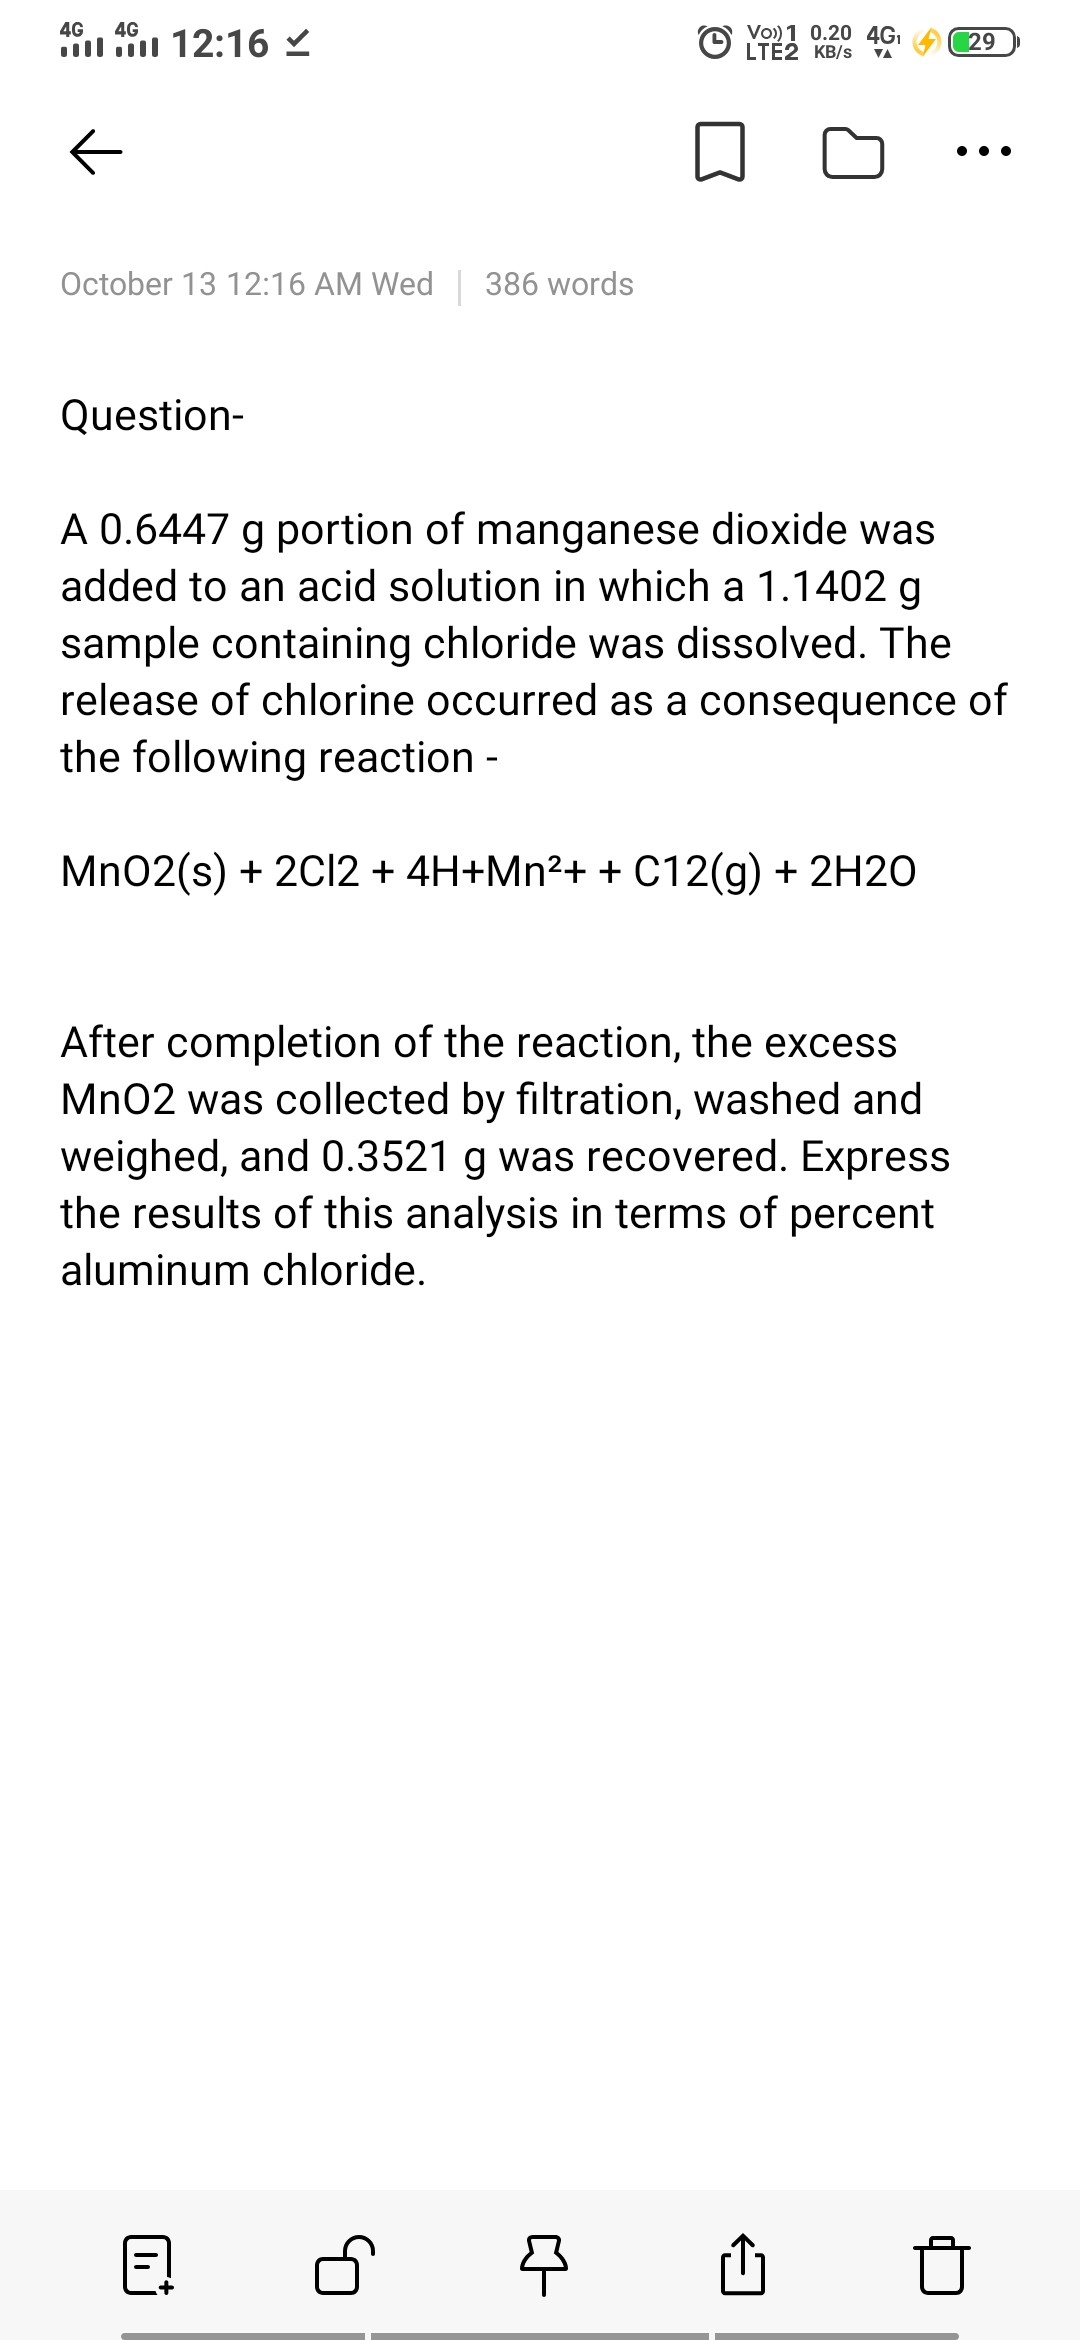 Vo)) 1 0.20 4GI
O LTÉŽ KB/s
4G
4G
l 12:16
29
VA
October 13 12:16 AM Wed | 386 words
Question-
A 0.6447 g portion of manganese dioxide was
added to an acid solution in which a 1.1402 g
sample containing chloride was dissolved. The
release of chlorine occurred as a consequence of
the following reaction -
Mn02(s) + 2C2 + 4H+Mn²+ + C12(g) + 2H2O
After completion of the reaction, the excess
Mn02 was collected by filtration, washed and
weighed, and 0.3521 g was recovered. Express
the results of this analysis in terms of percent
aluminum chloride.
